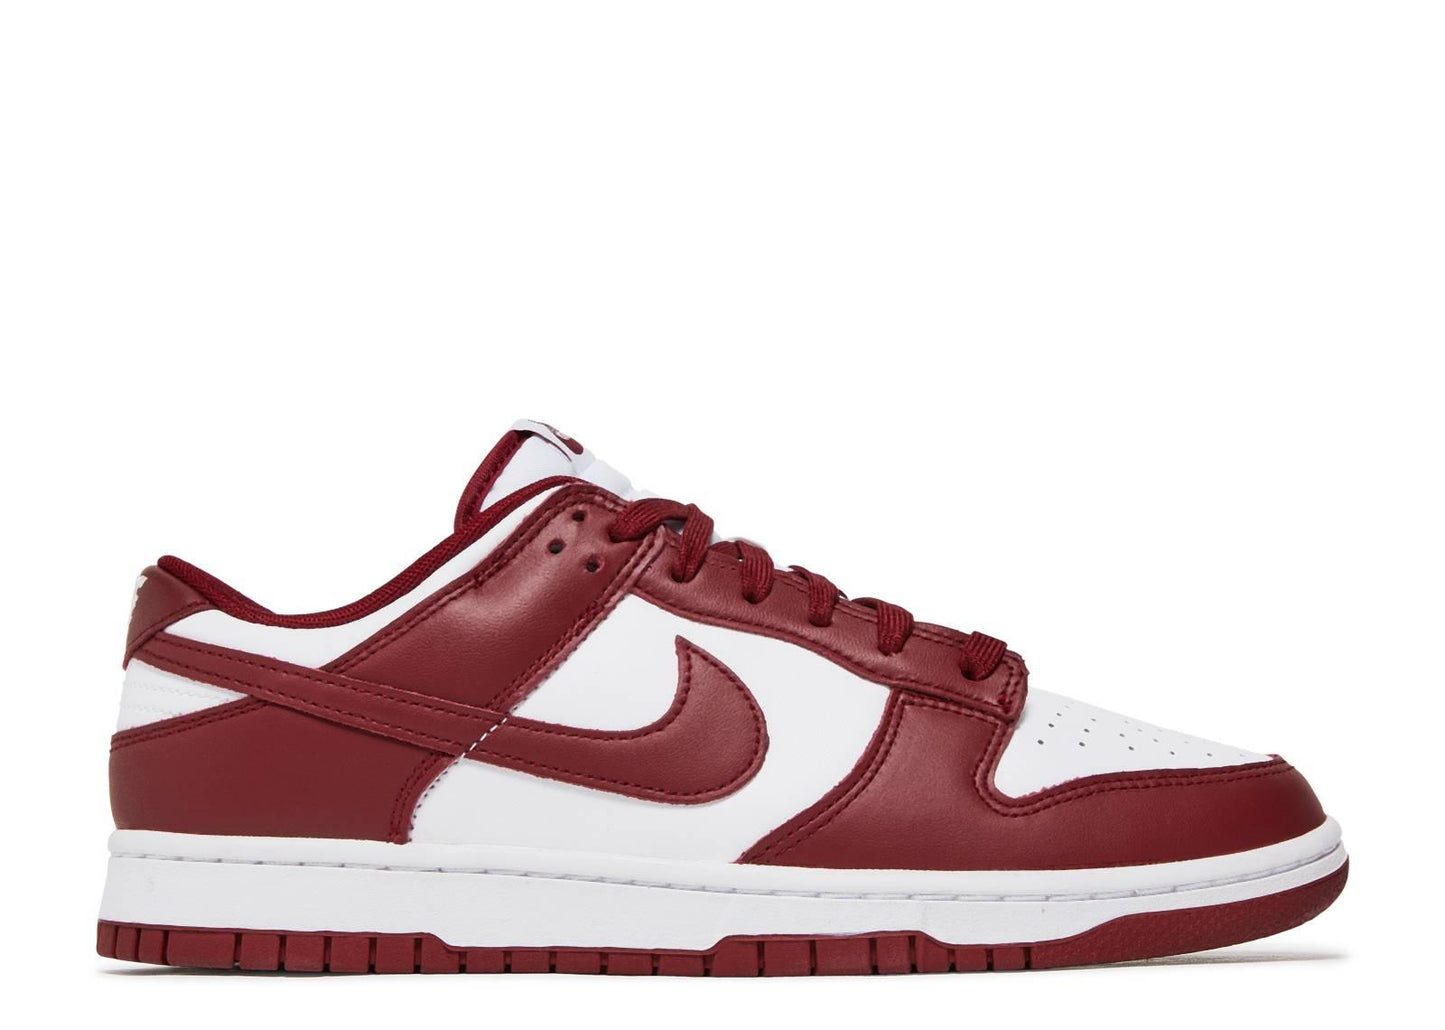 Nike Dunk Low Team Red - The Hype Kelowna